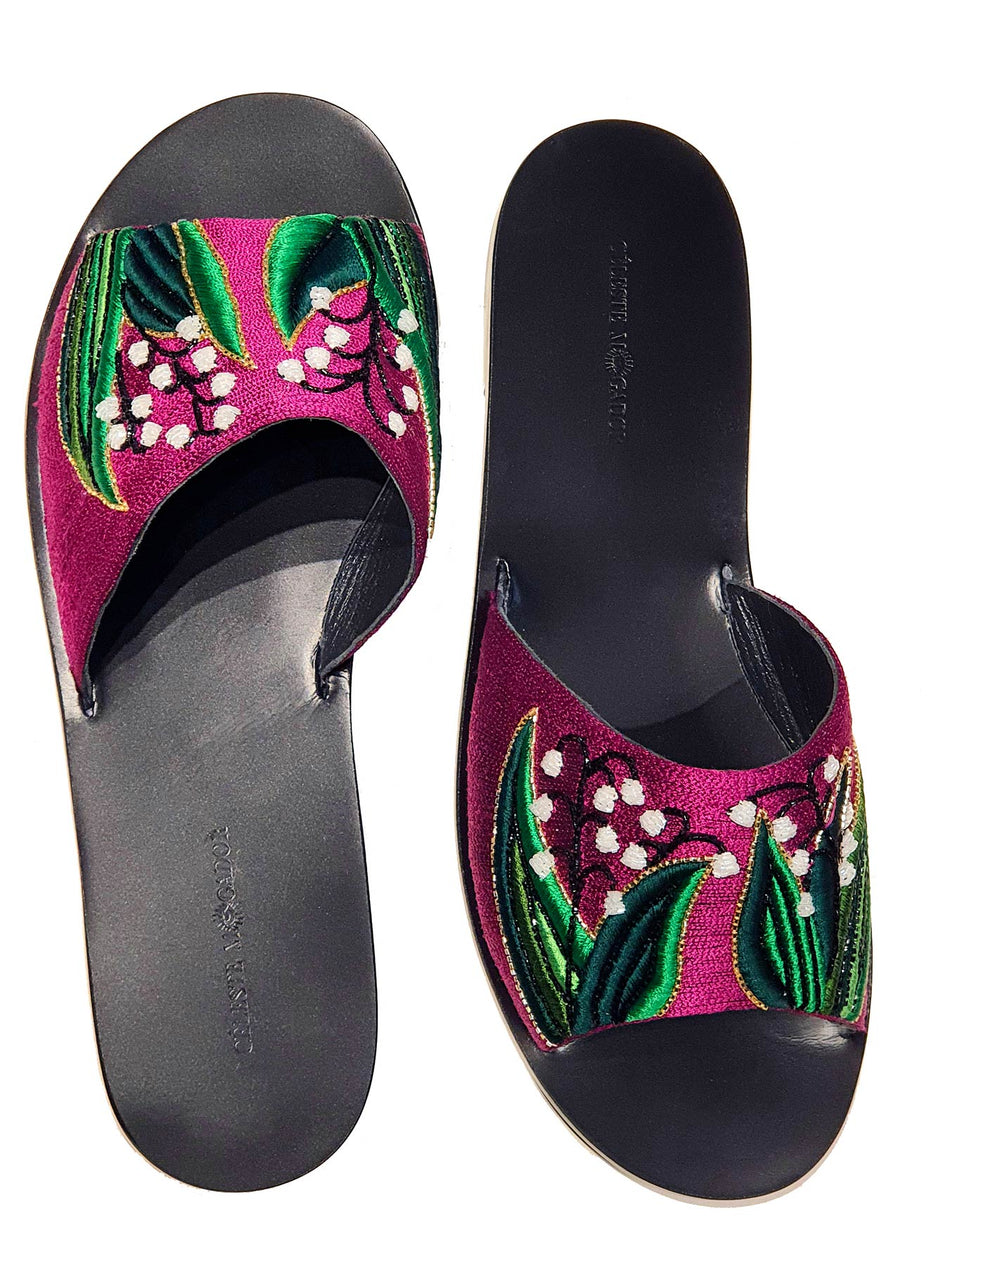 "Lily of the valley" sandals